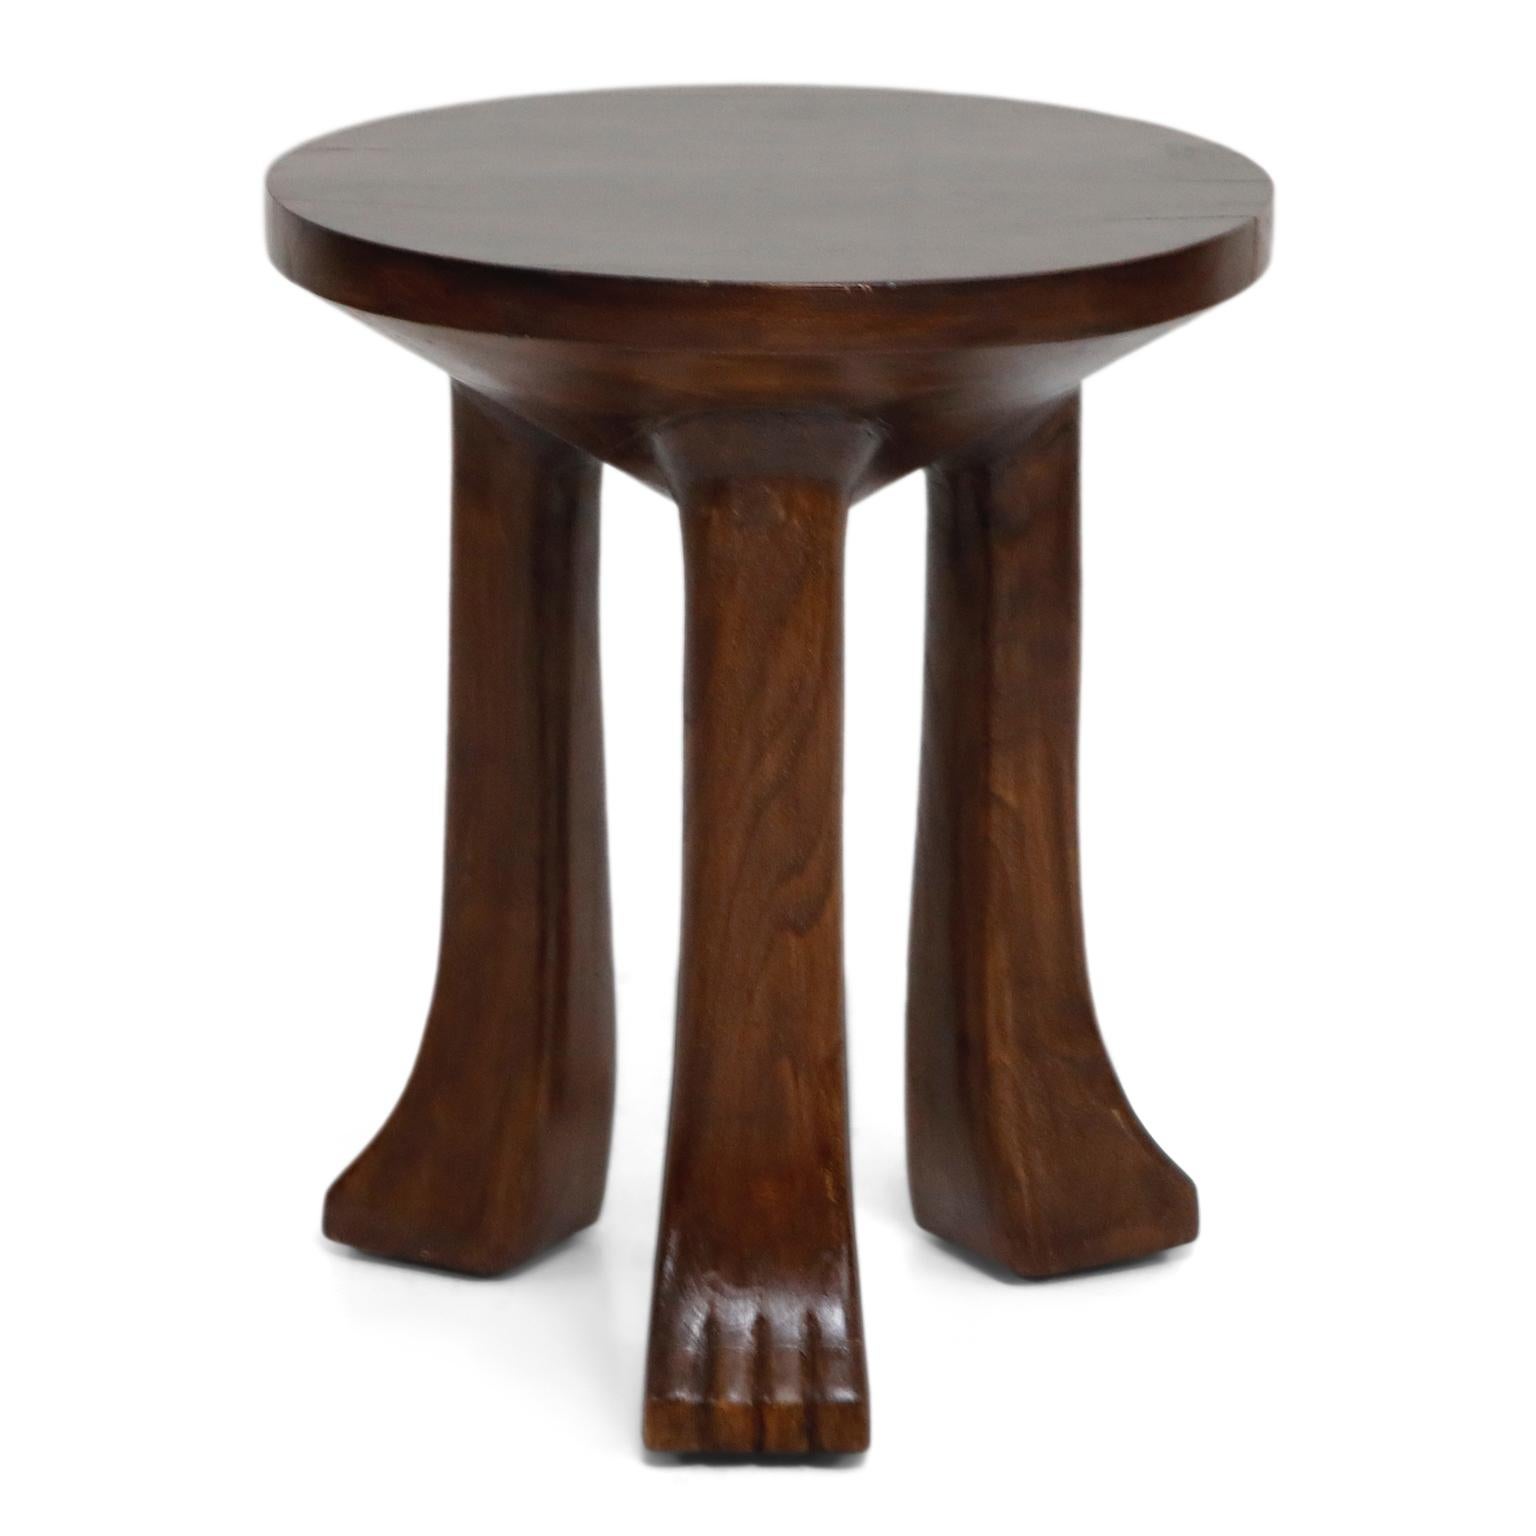 Tribal Carved Teak Three-Legged Lionfoot Stools in the Style of John Dickinson